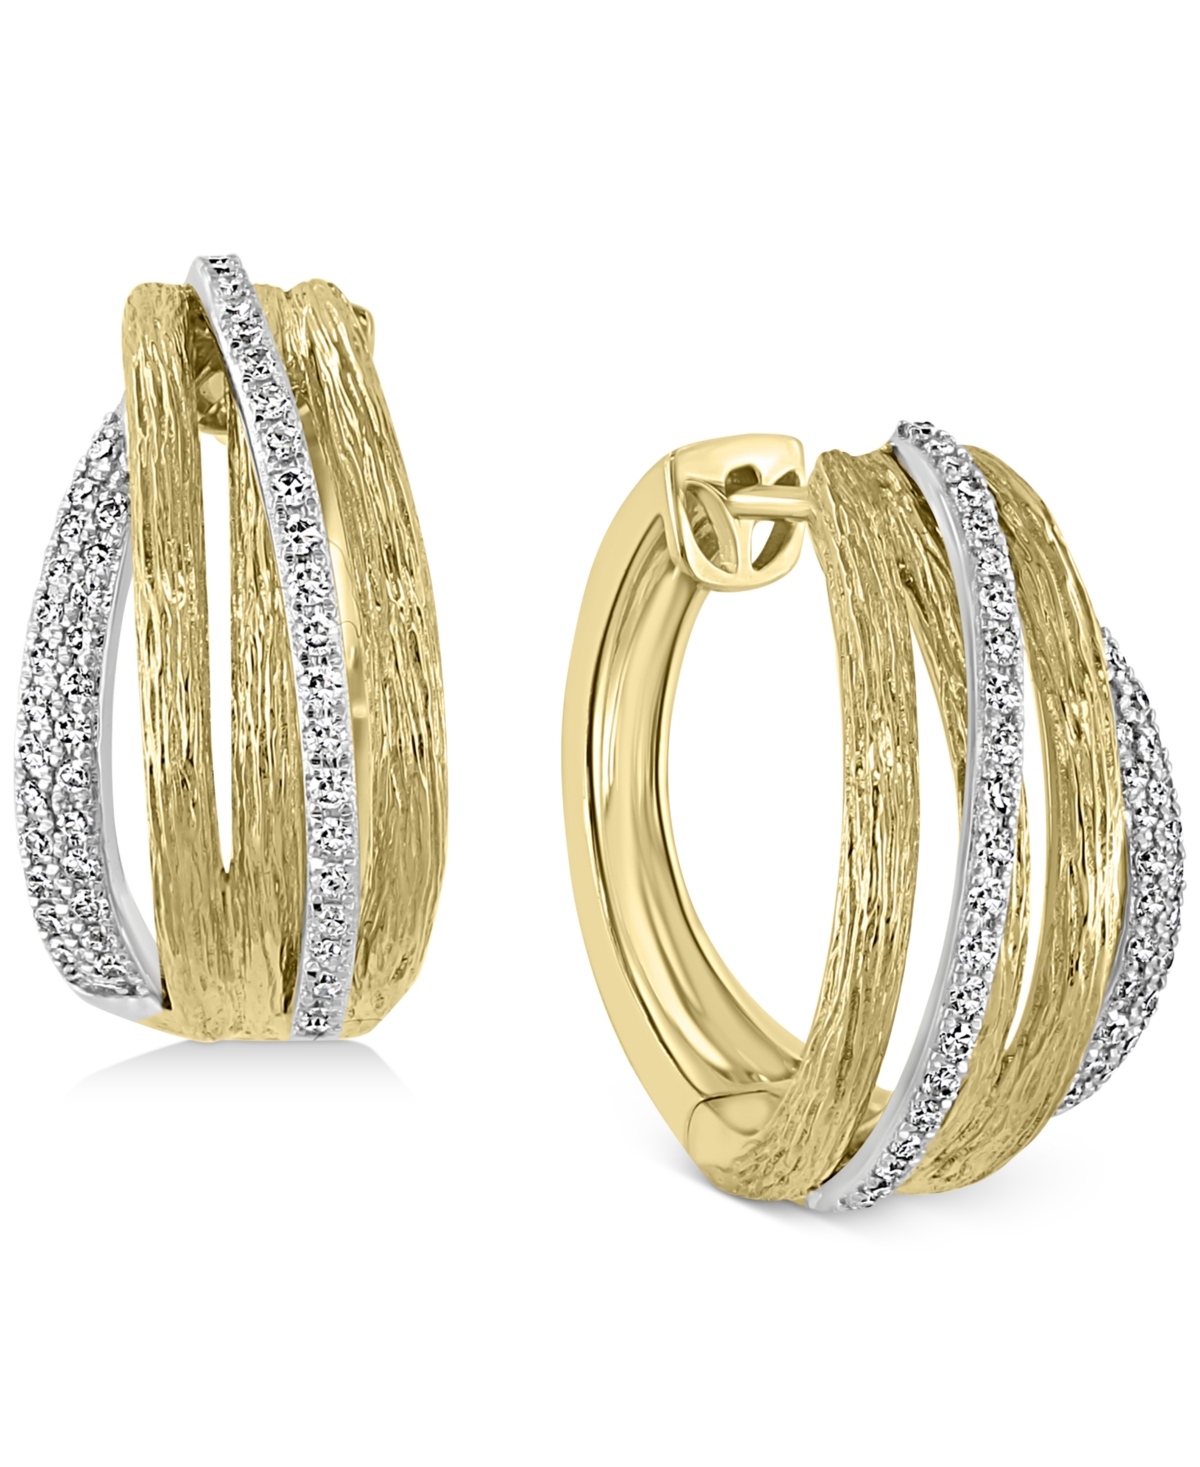 Effy Collection Effy Diamond Two-Tone Multirow Hoop Earrings (3/8 ct. t.w.) in 14k Gold & White Gold